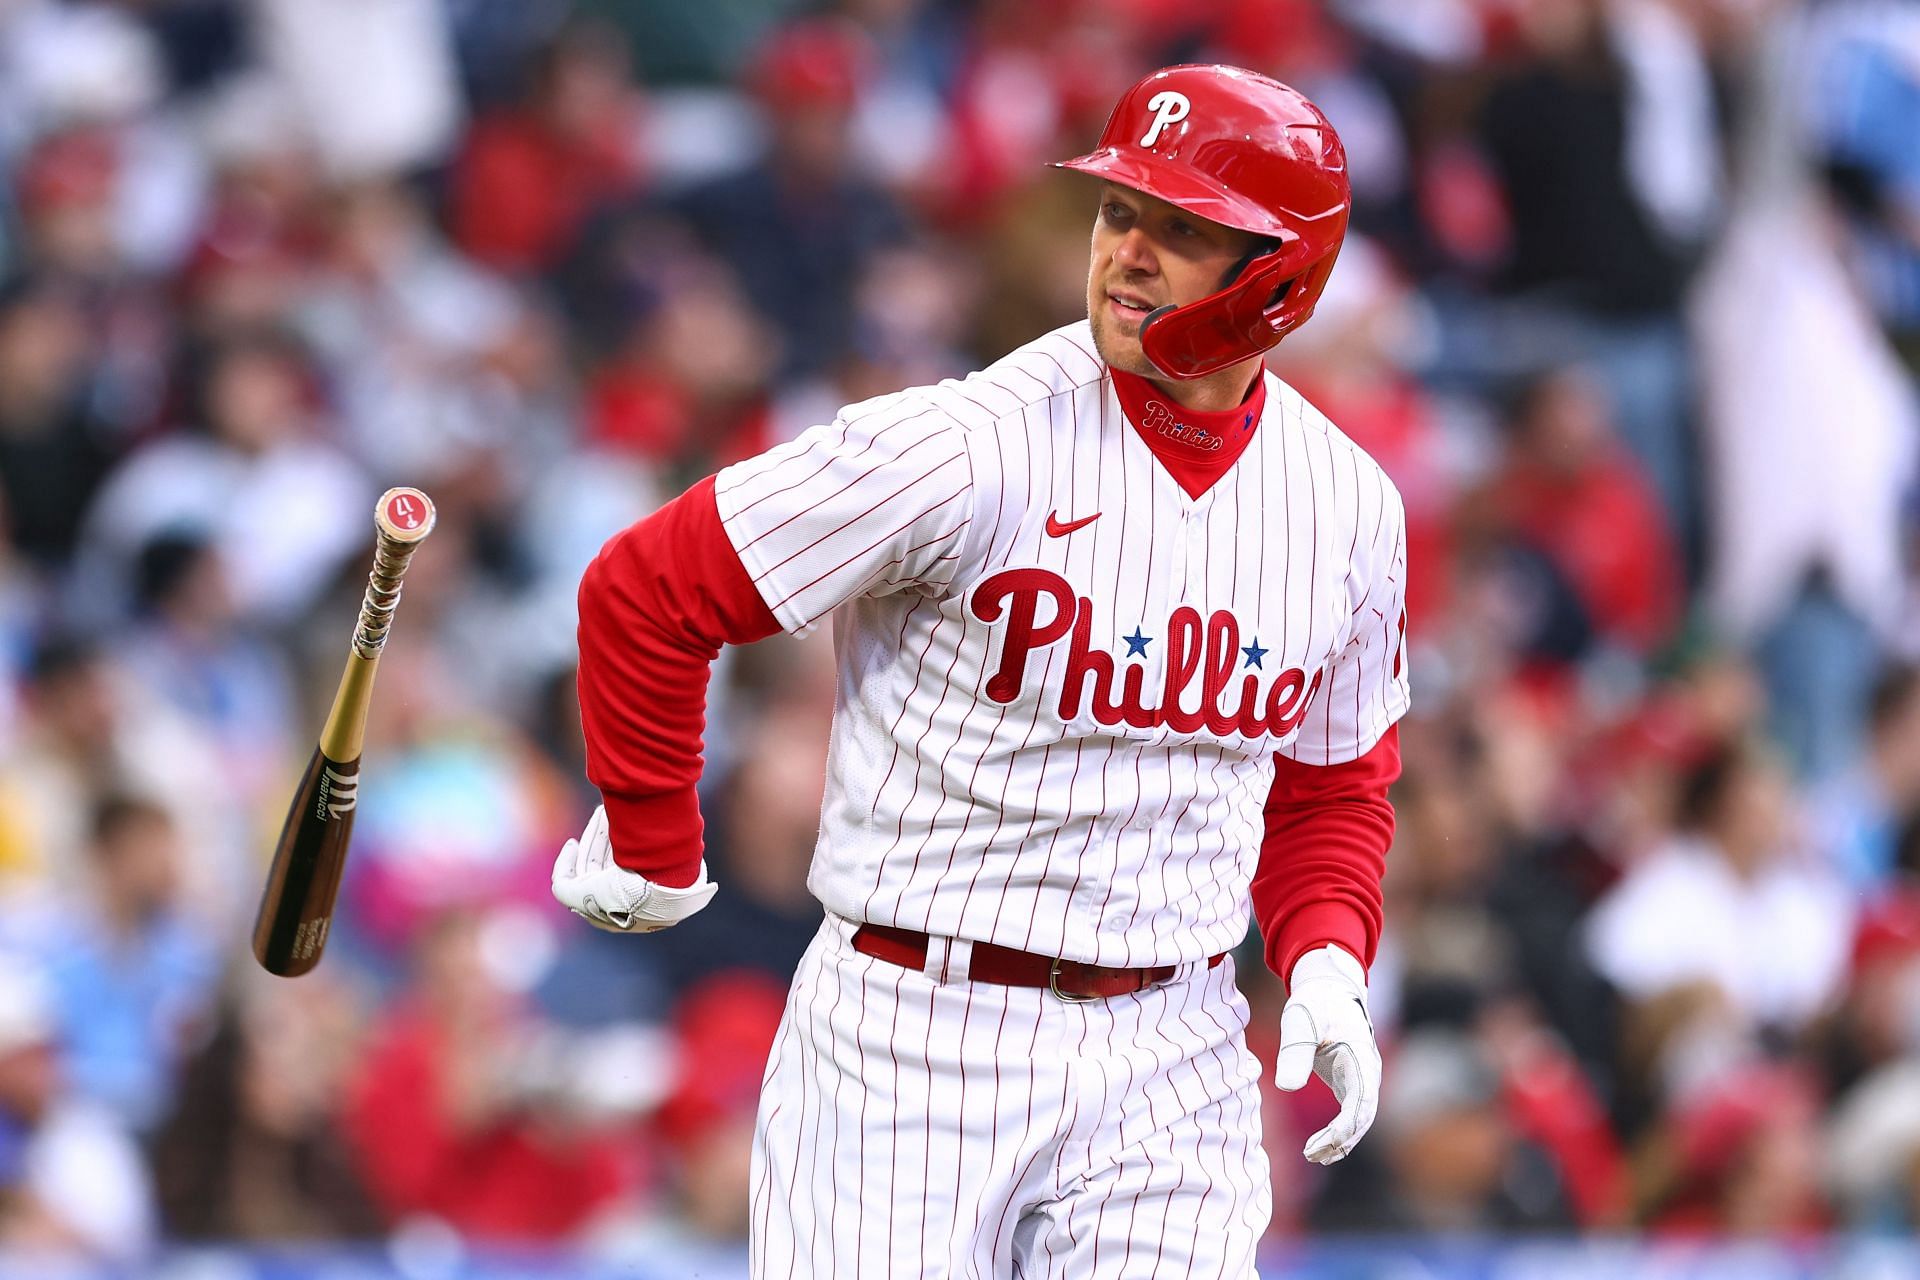 Hoskins, streaking Phillies rout Nationals 11-5